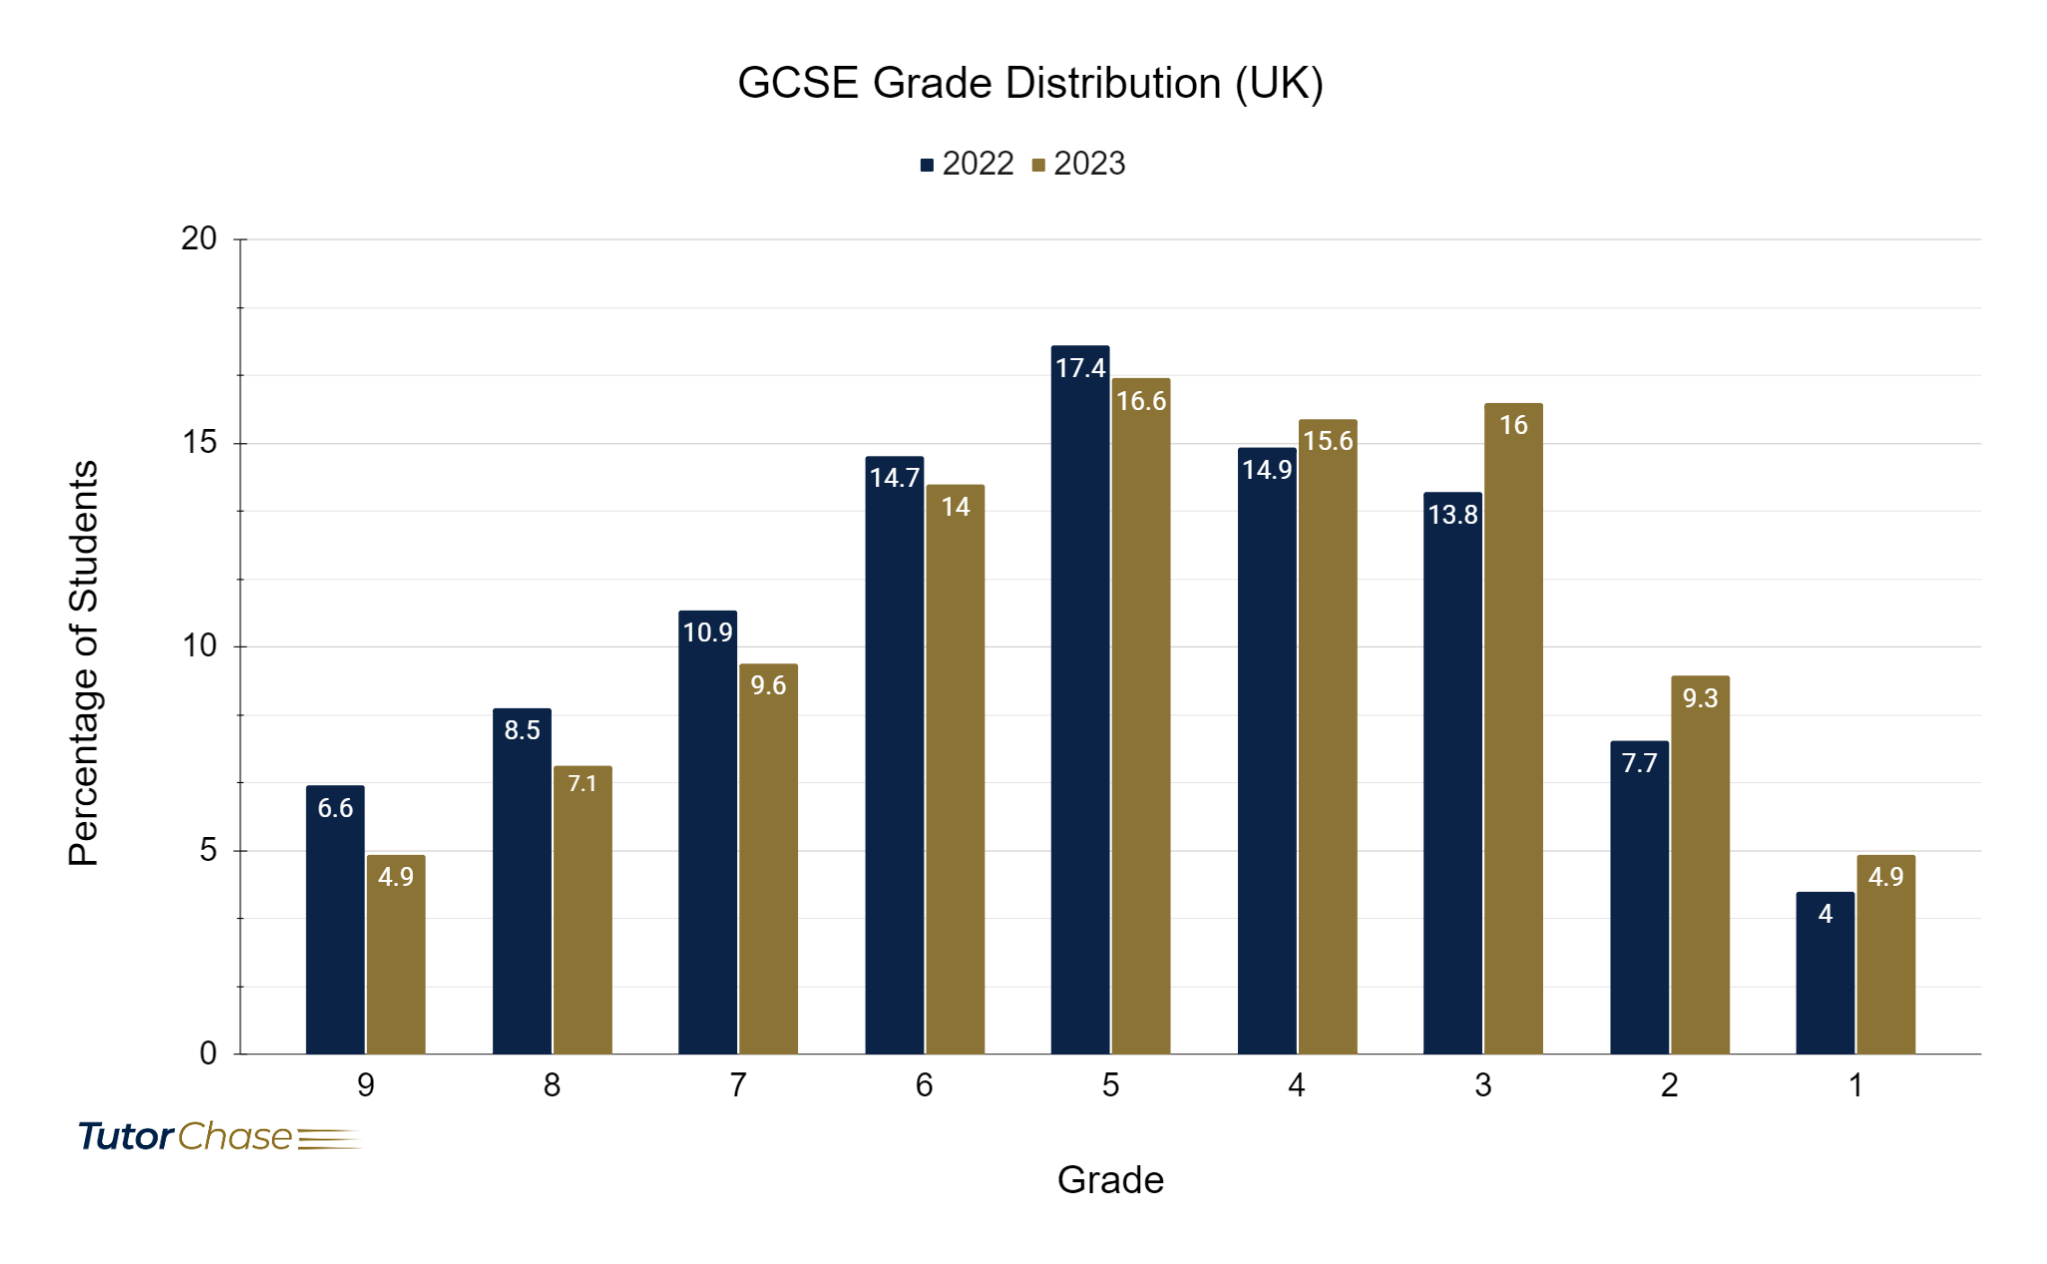 grades distribution of GCSEs in the UK for 2022 and 2023